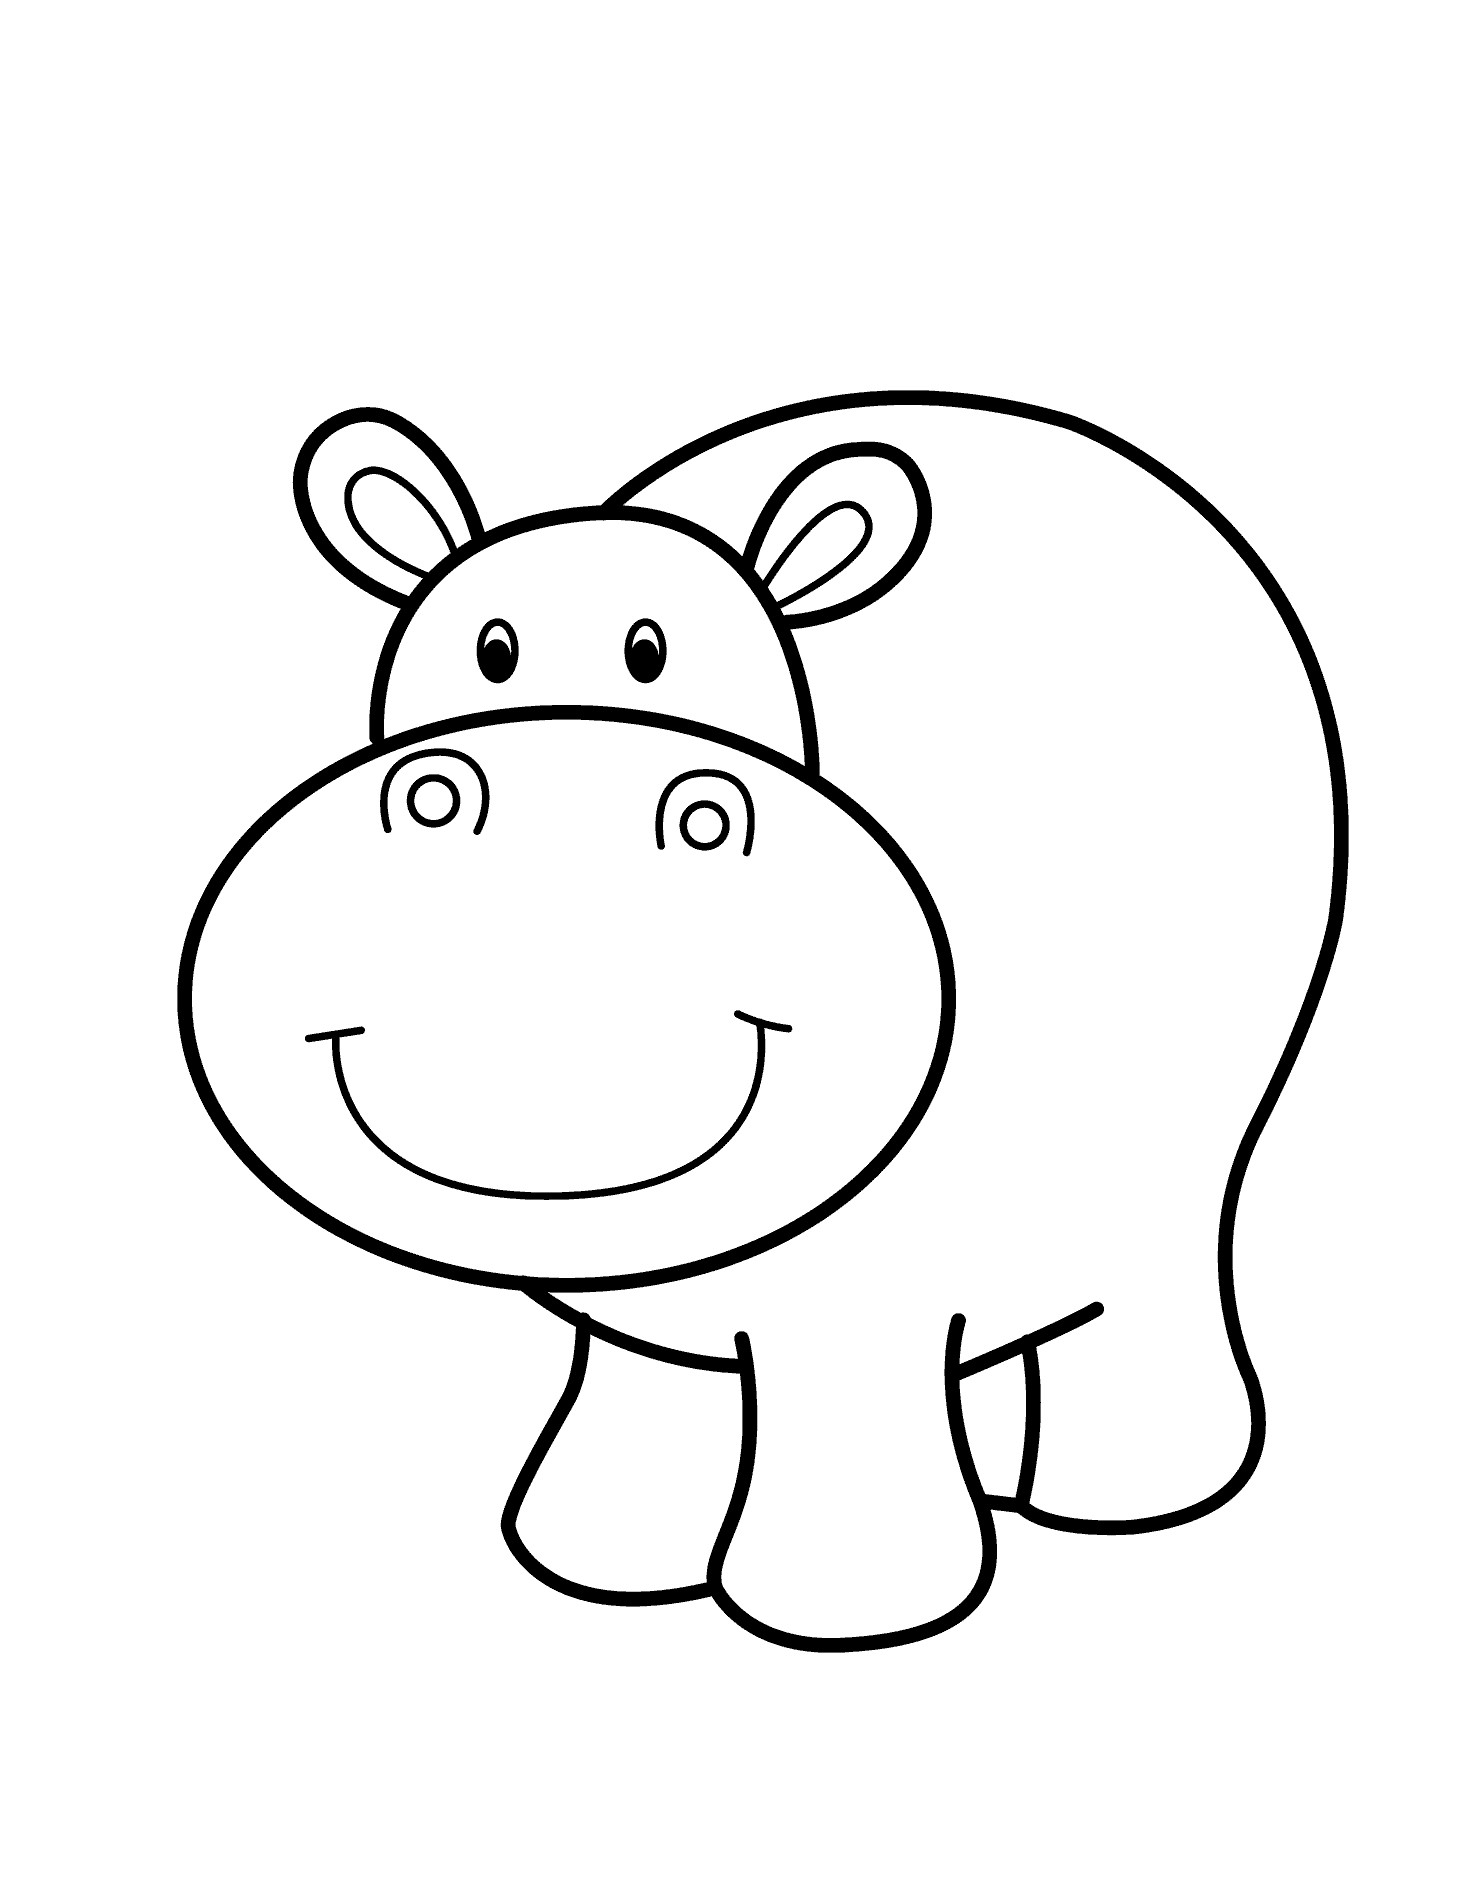 Baby Hippo Coloring Pages
 Hippo smiling cartoon animals coloring pages for kids